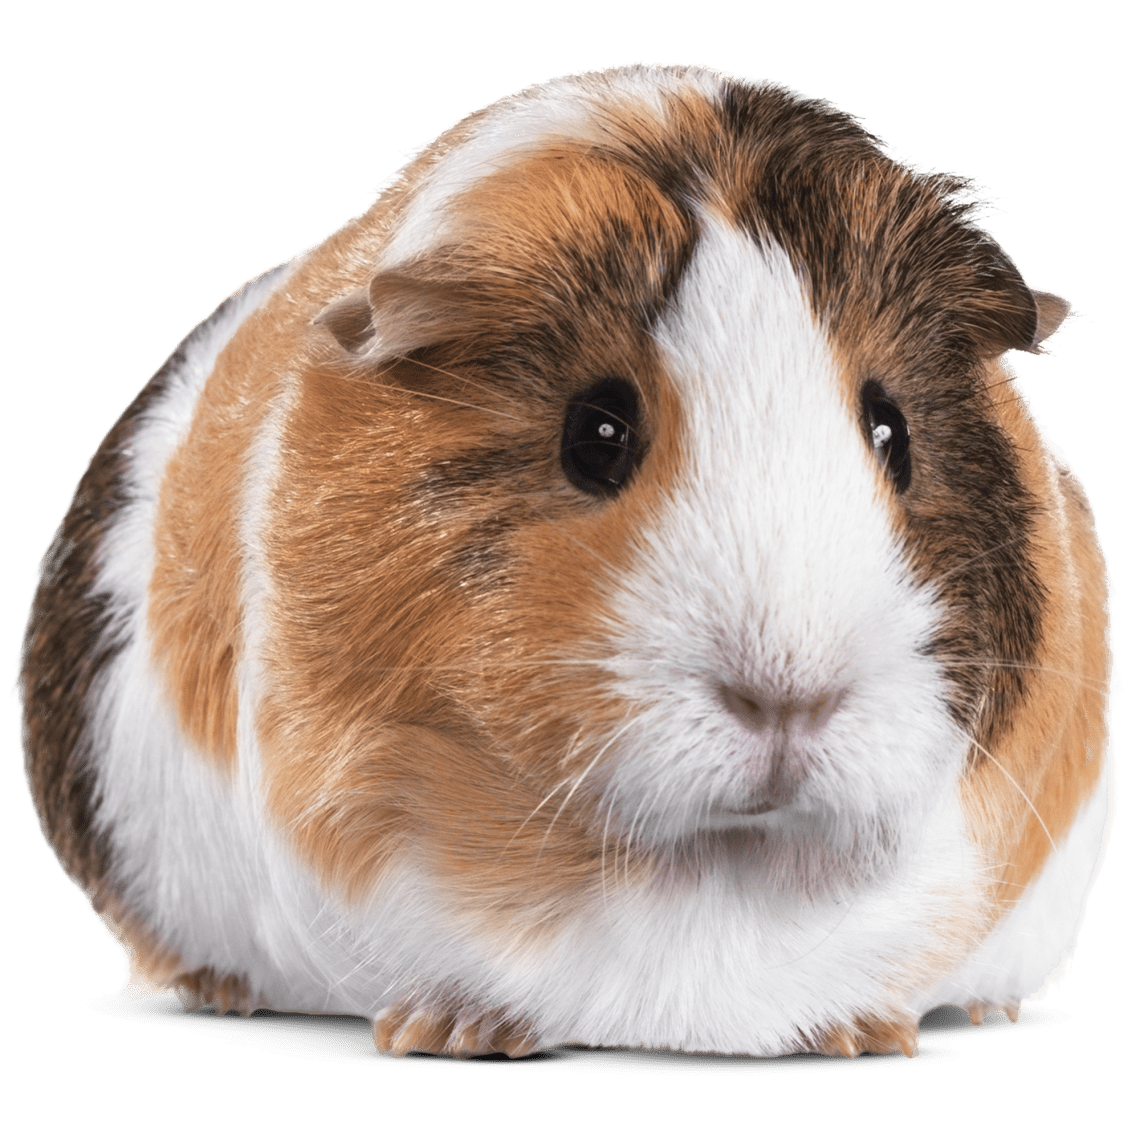 Buying a guinea pig